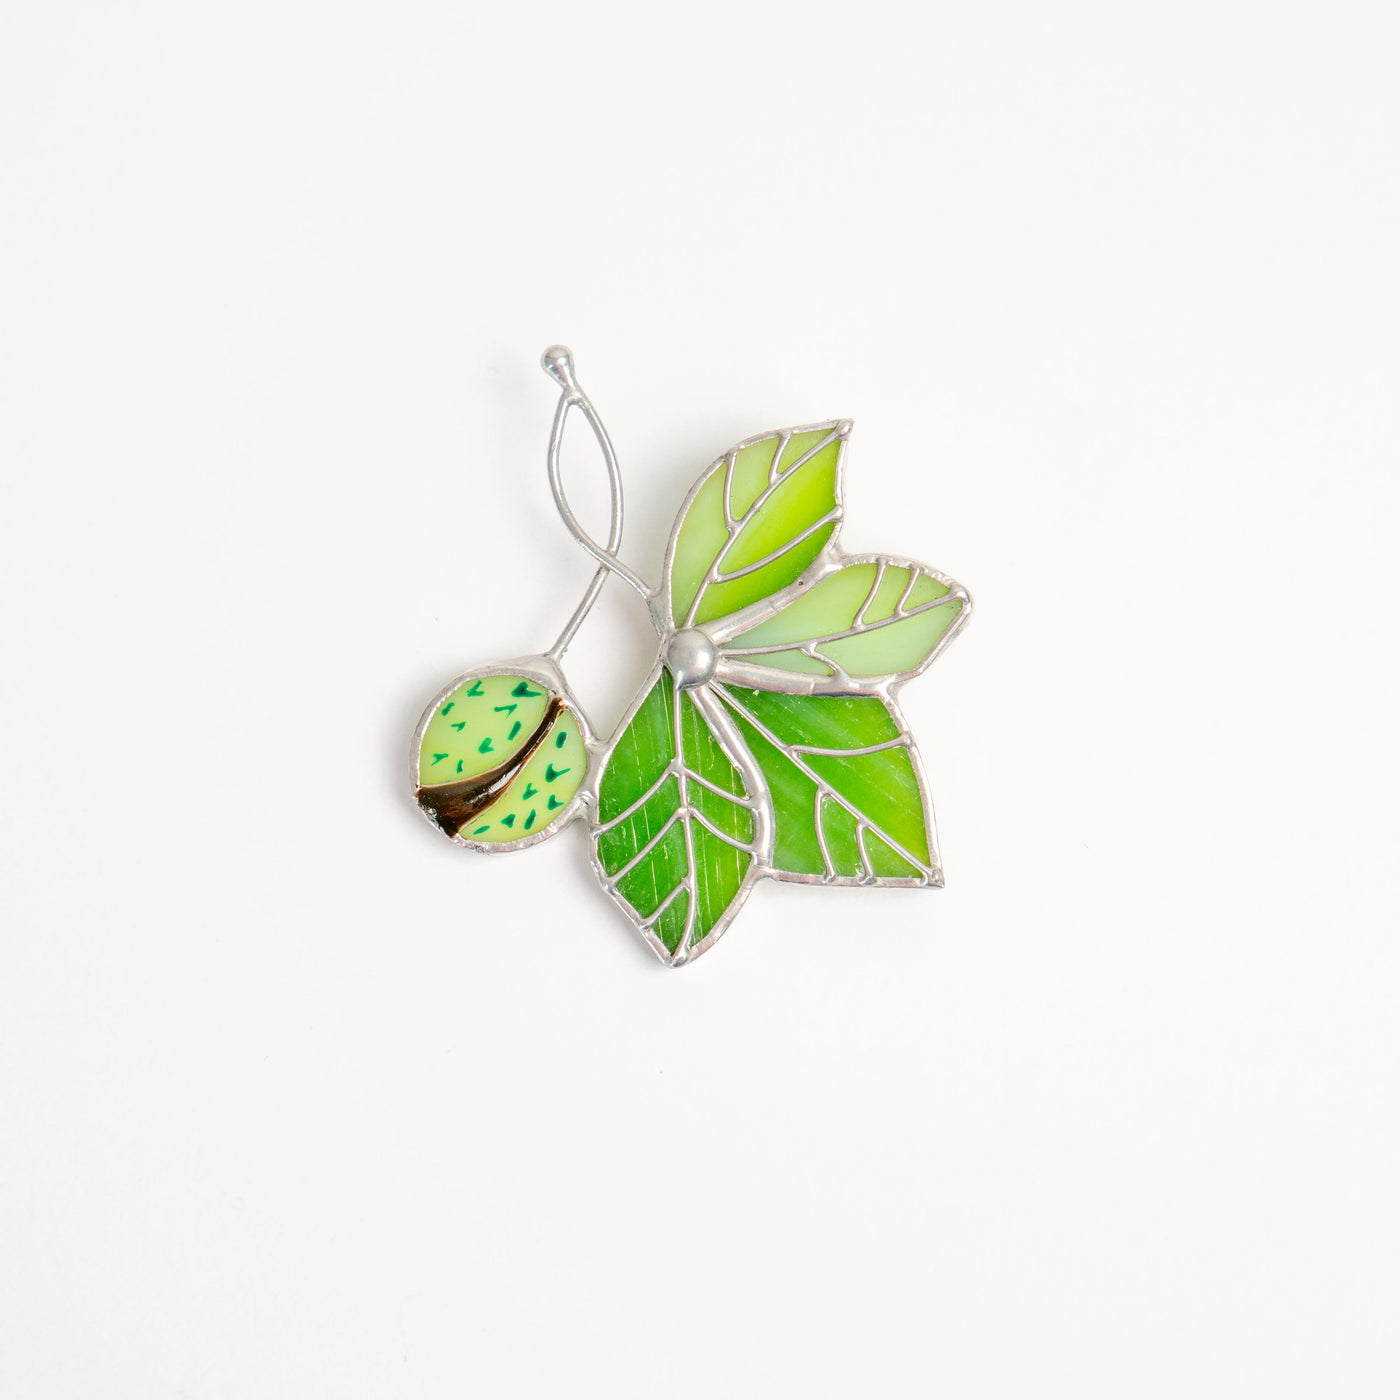 Stained glass chestnut with the leaves brooch